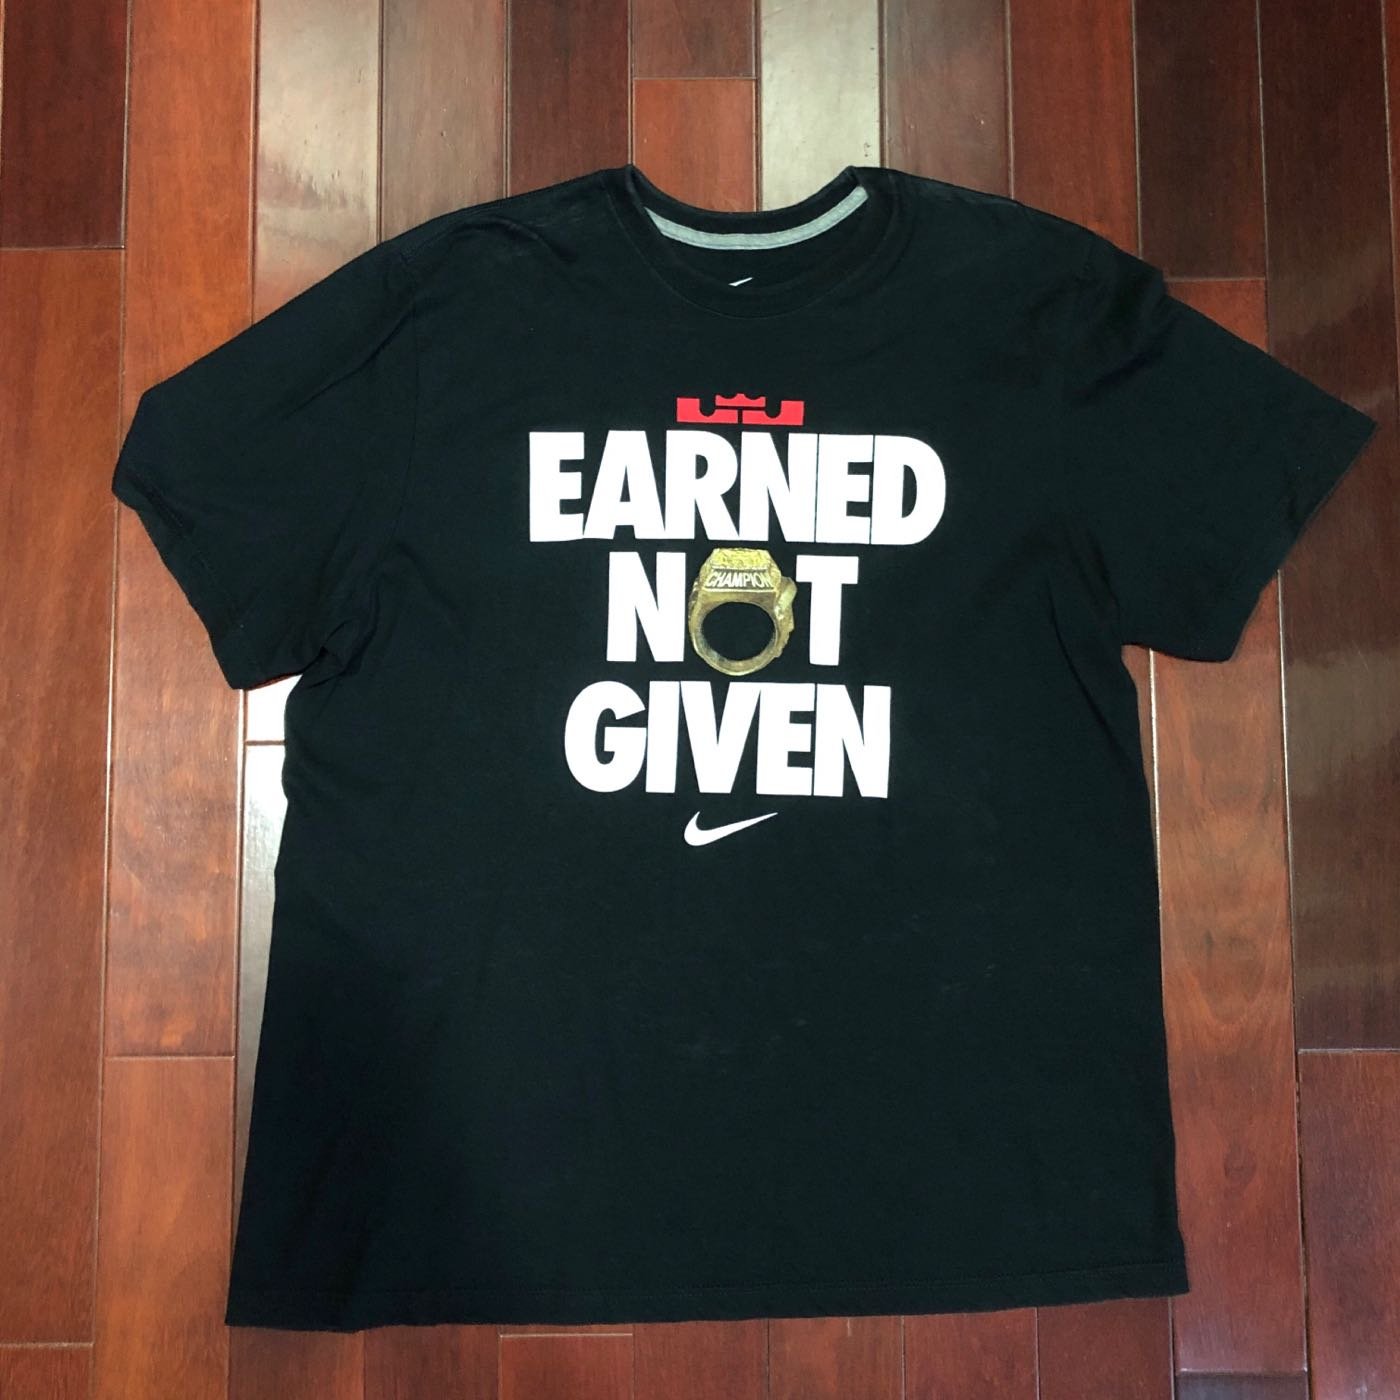 RiggaLAB] NIKE LEBRON EARNED NOT GIVEN 短T / 2012 / Yahoo奇摩拍賣